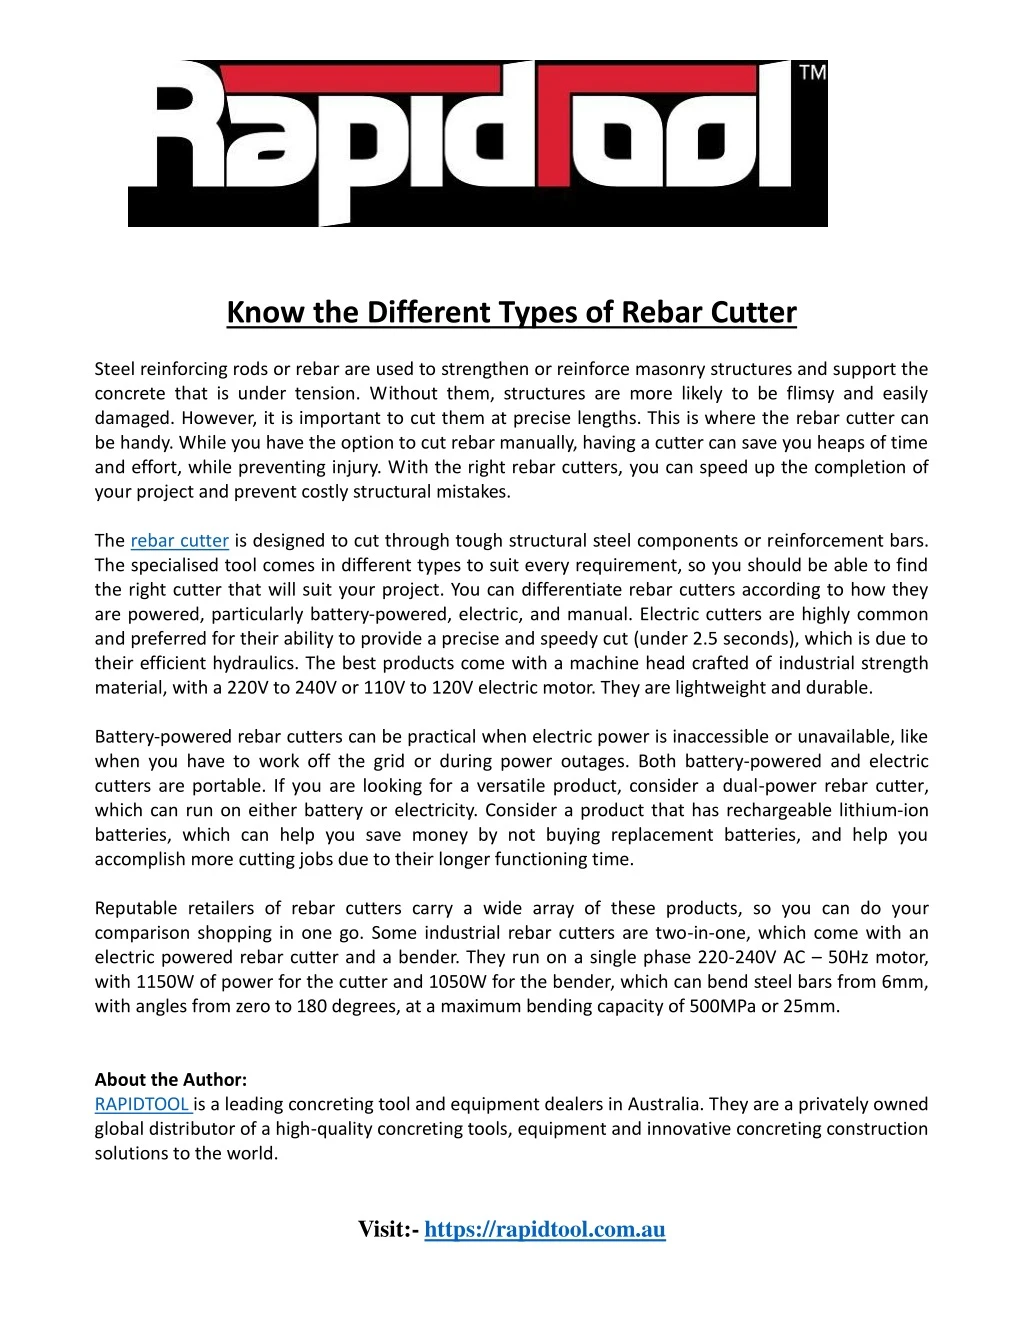 know the different types of rebar cutter